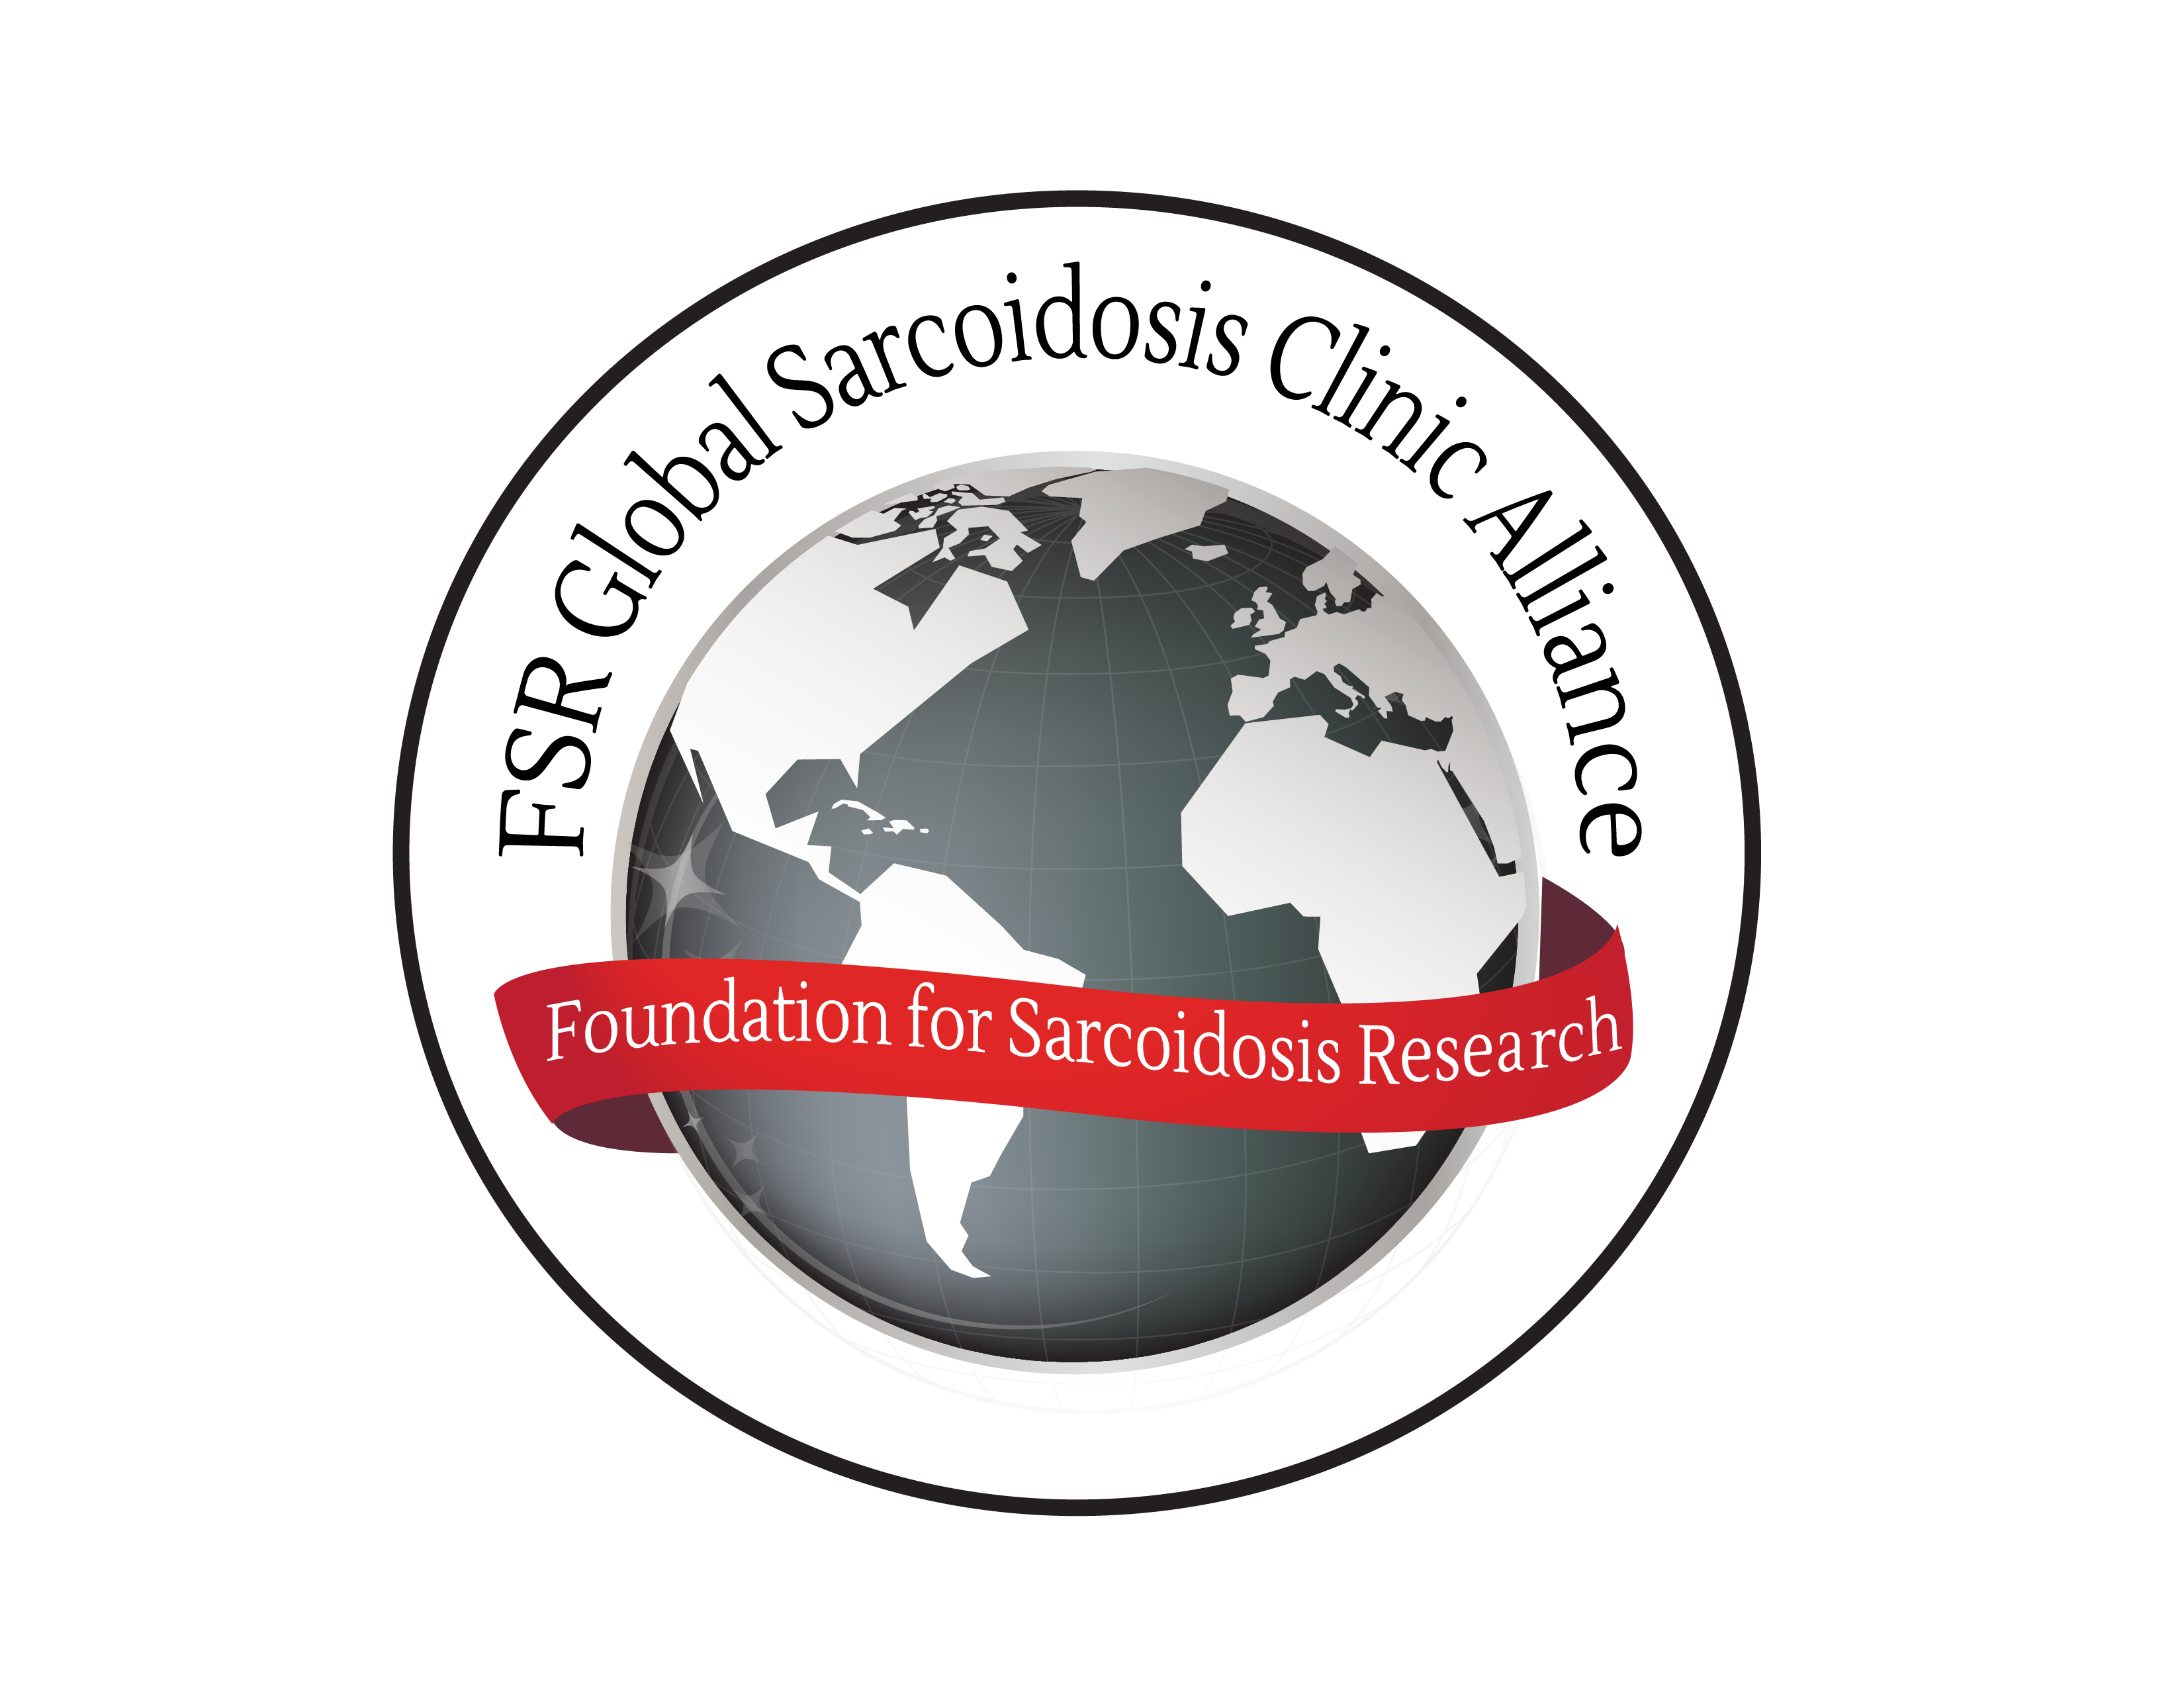 Foundation for Sarcoidosis Research Launches Groundbreaking Global Rare Disease Initiative